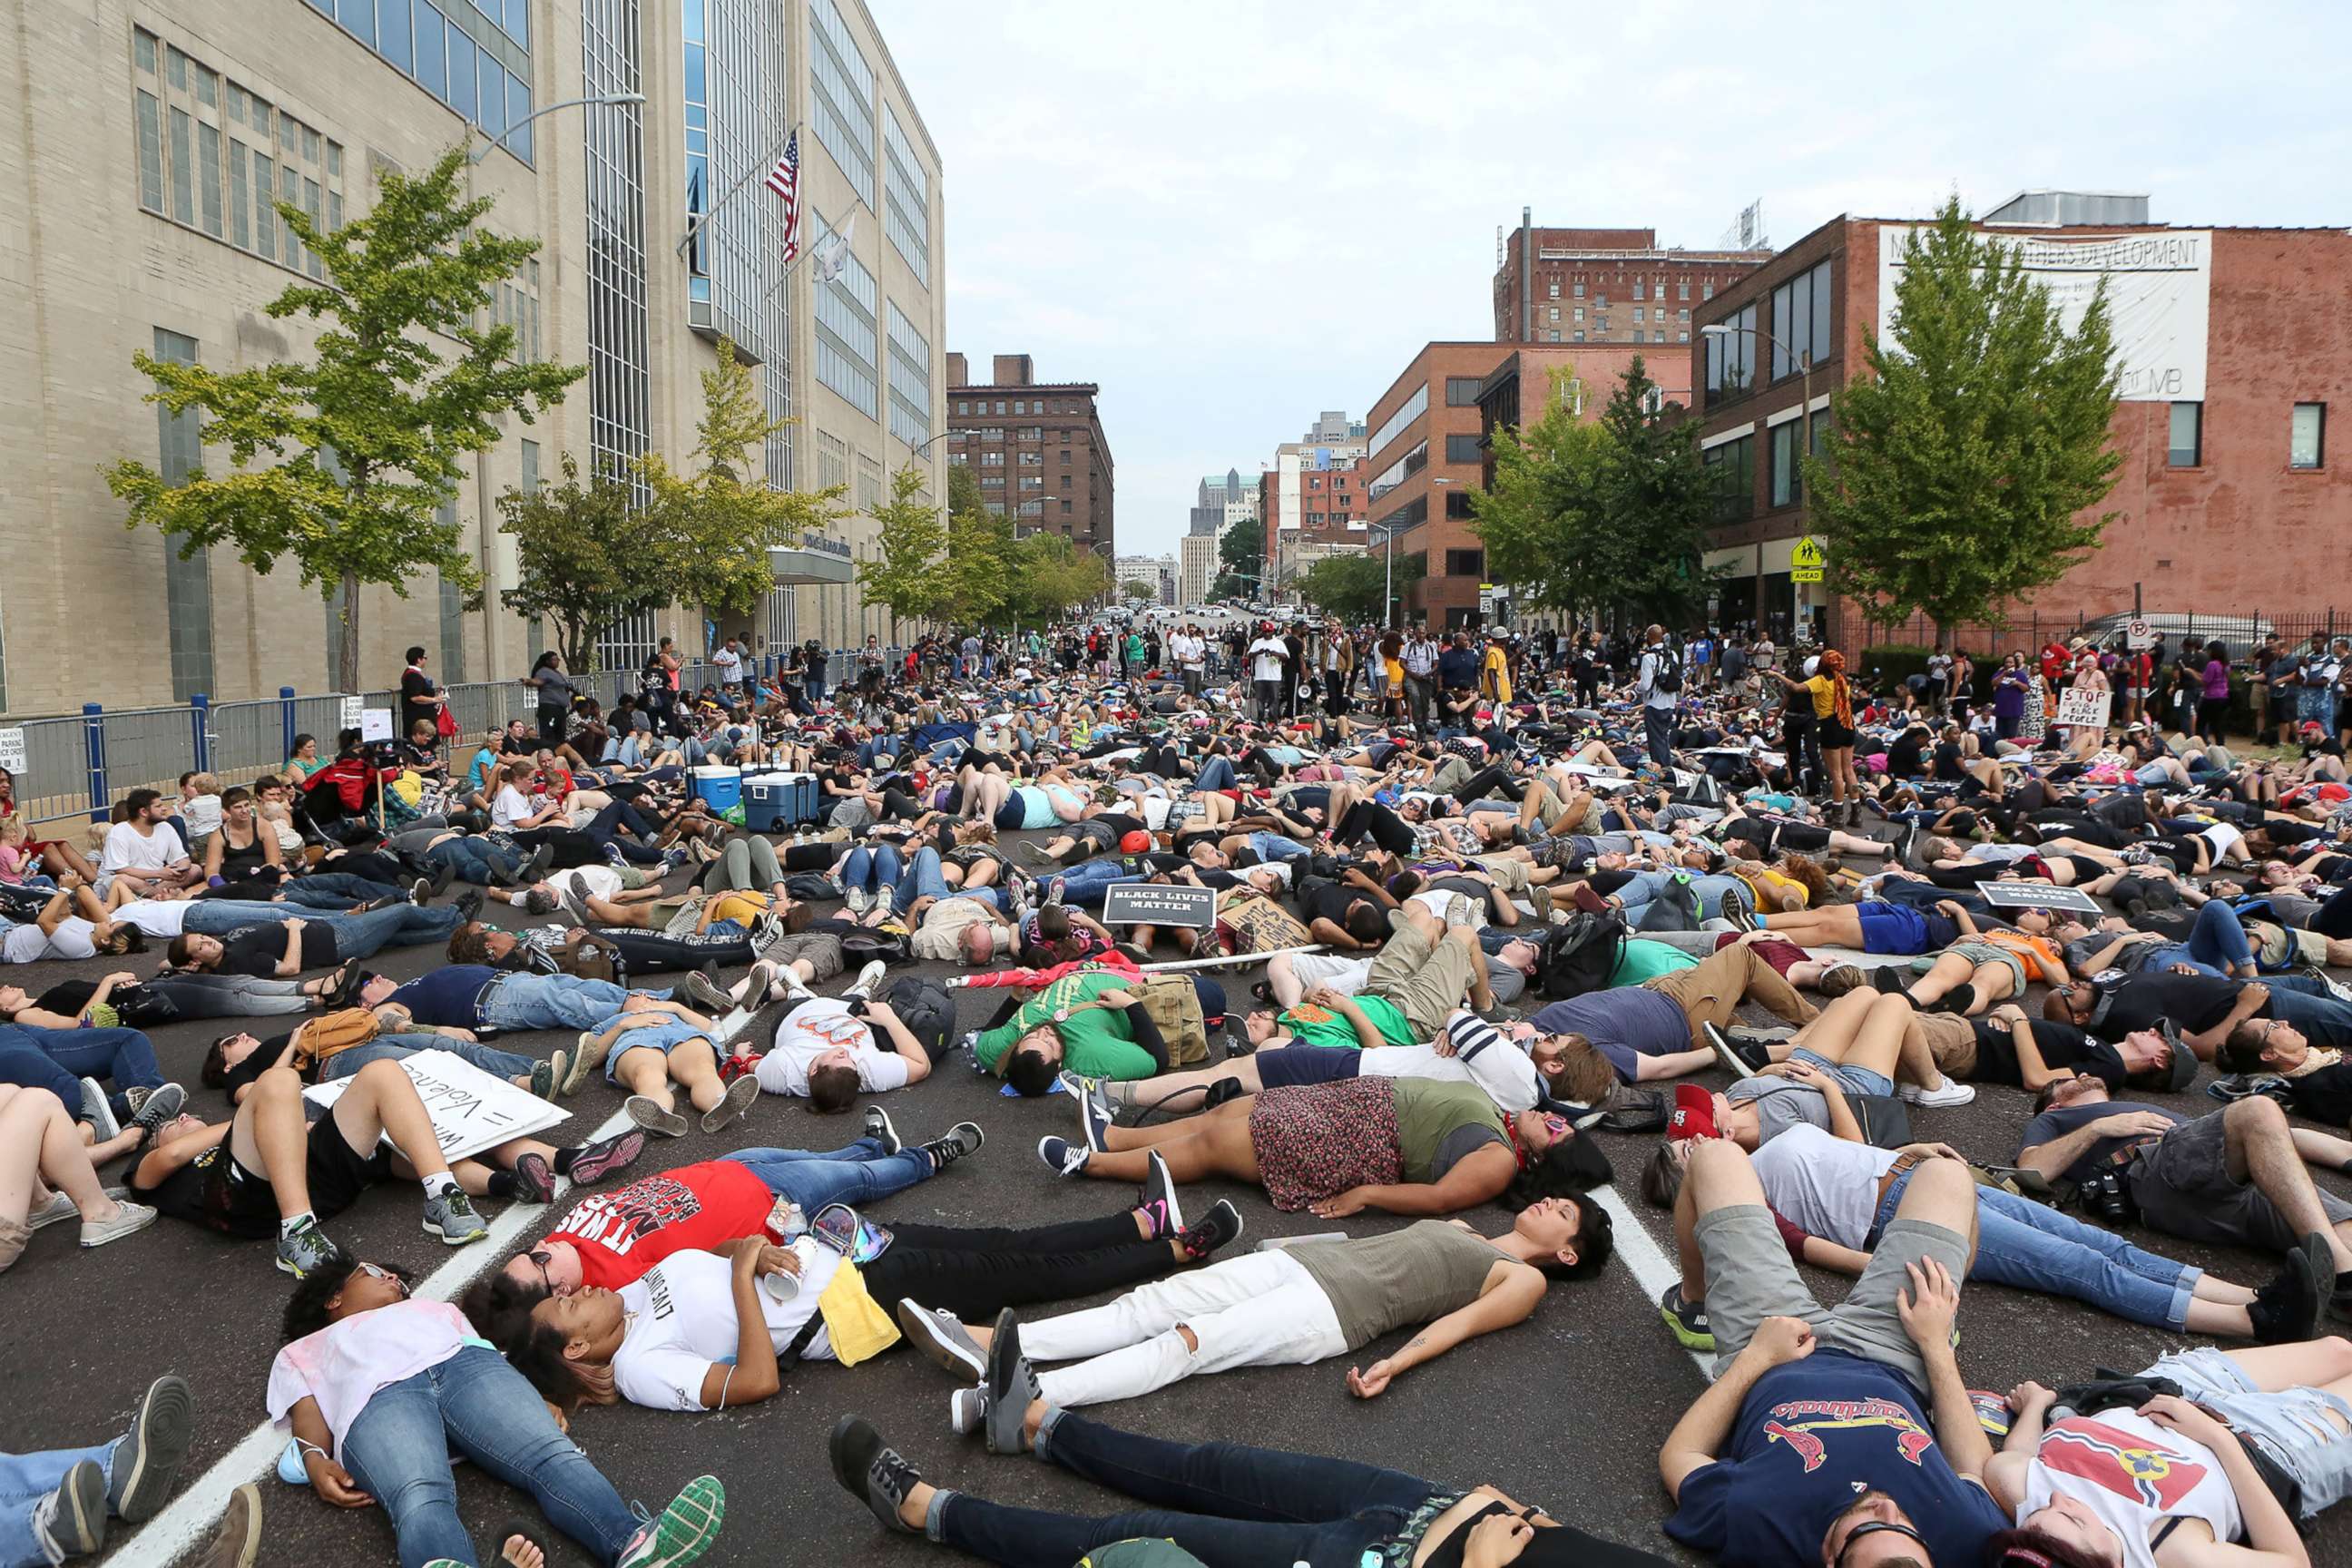 PHOTO: Protesters stage a "die-in" during a rally outside the police headquarters after the not guilty verdict in the murder trial of Jason Stockley, a former St. Louis police officer, Sept. 17, 2017. 